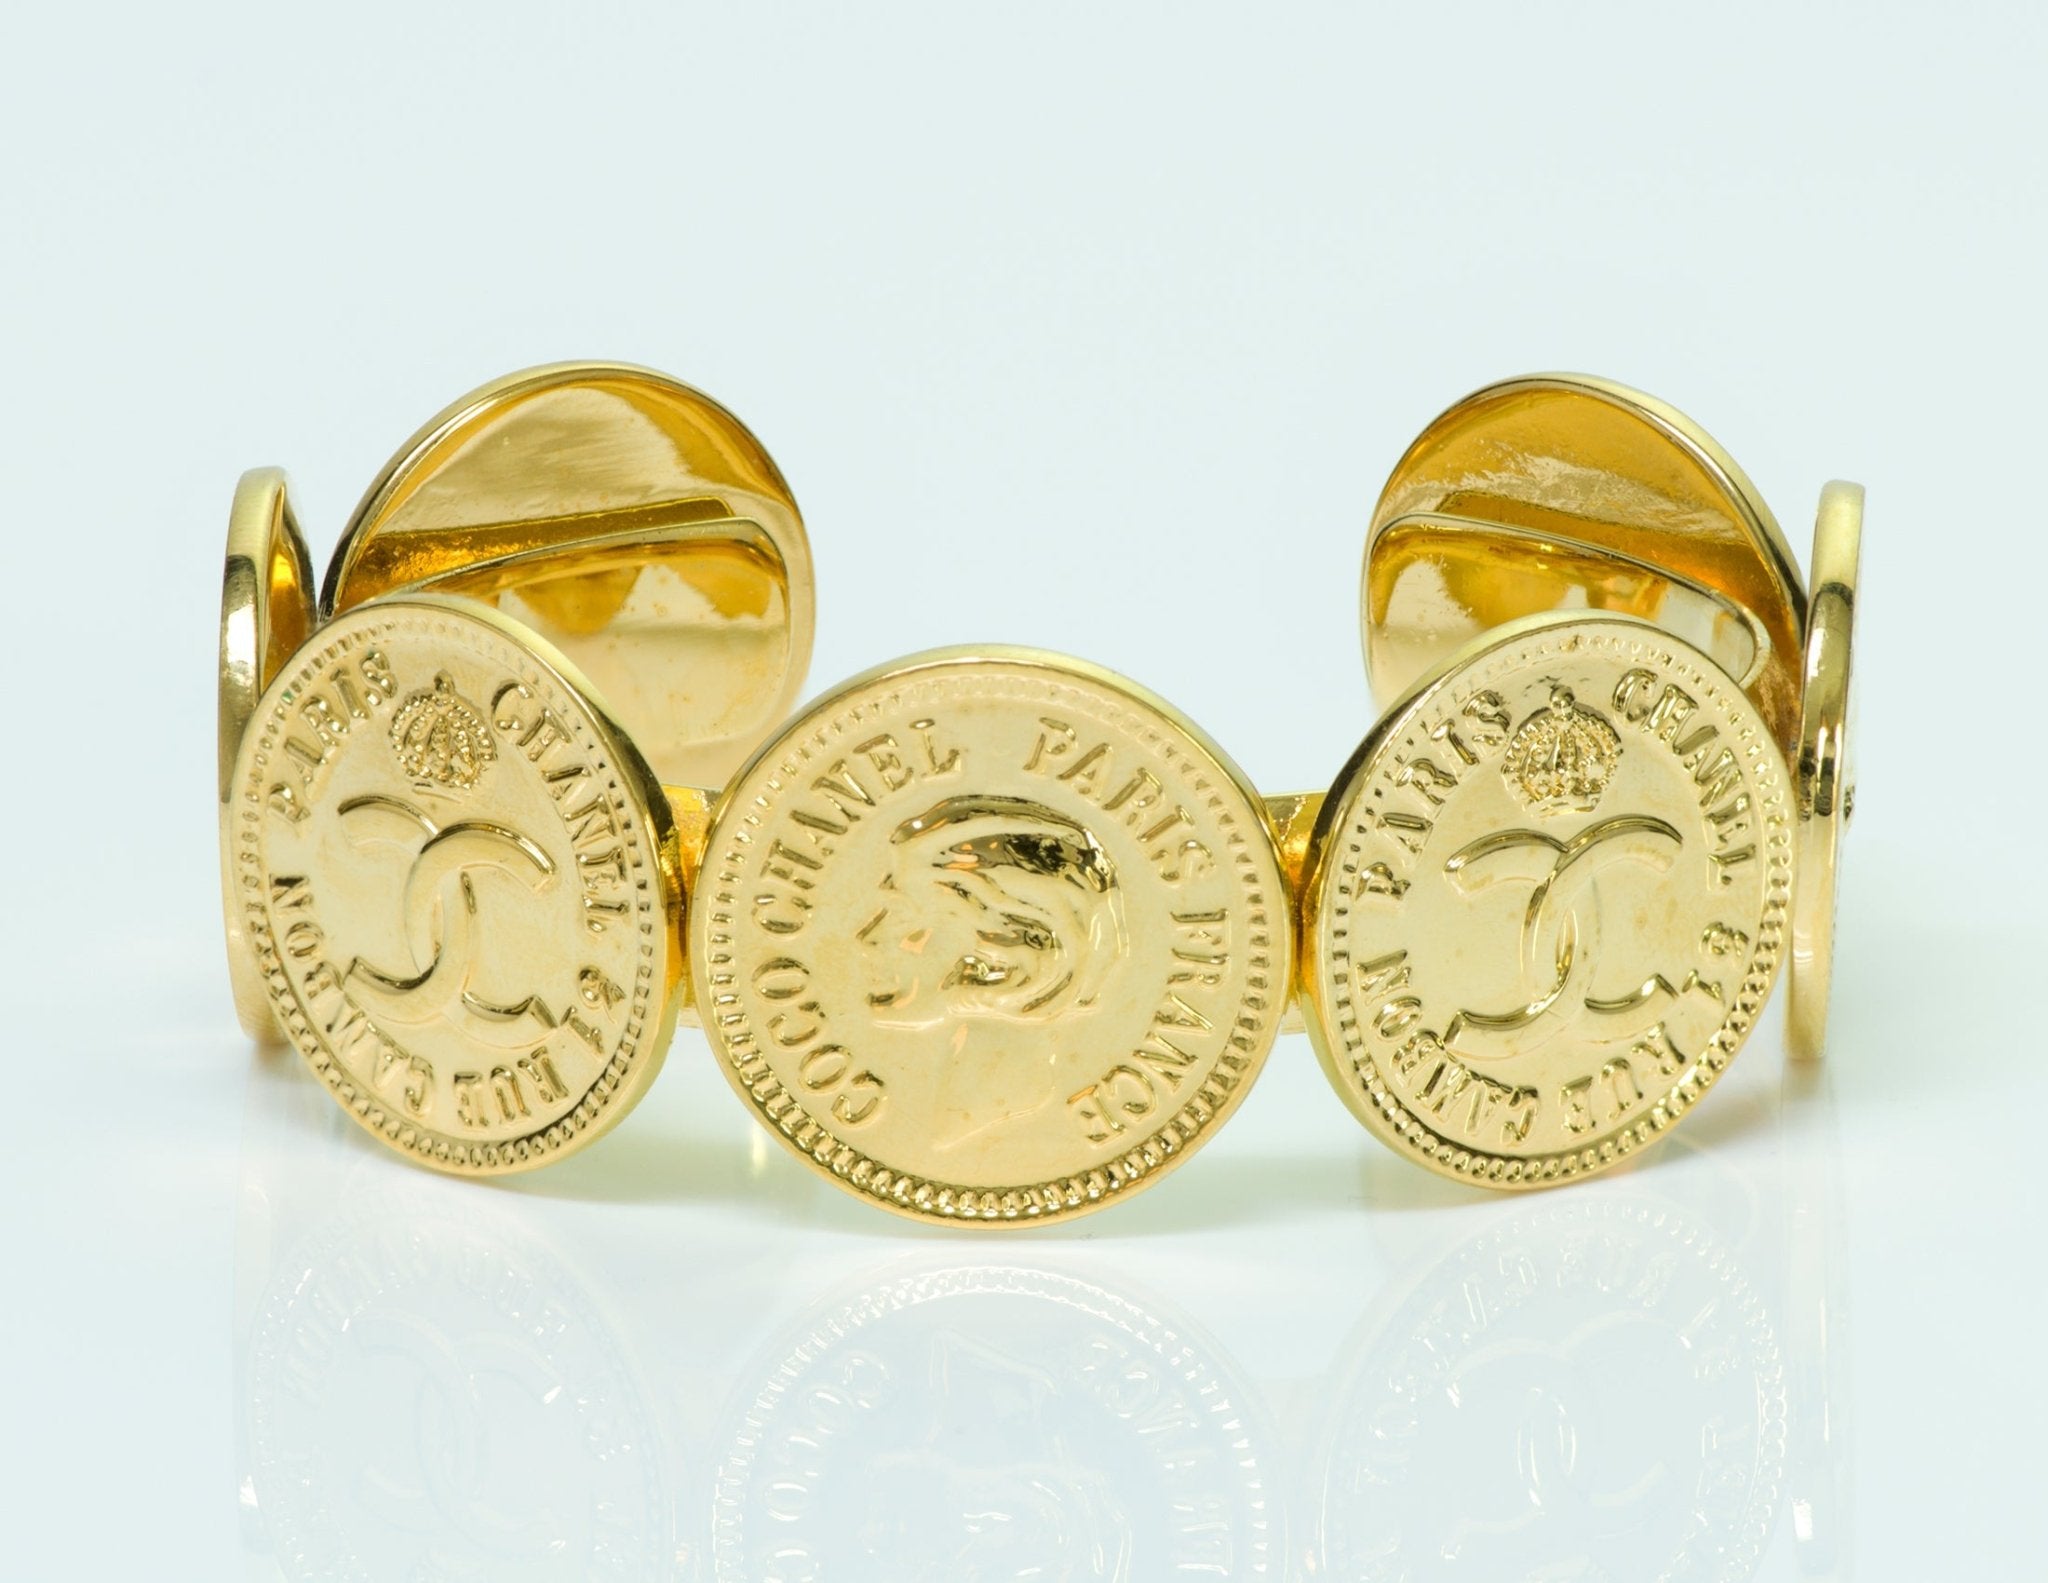 Chanel 1980’s Coco Mademoiselle Coin Cuff Bracelet - DSF Antique Jewelry